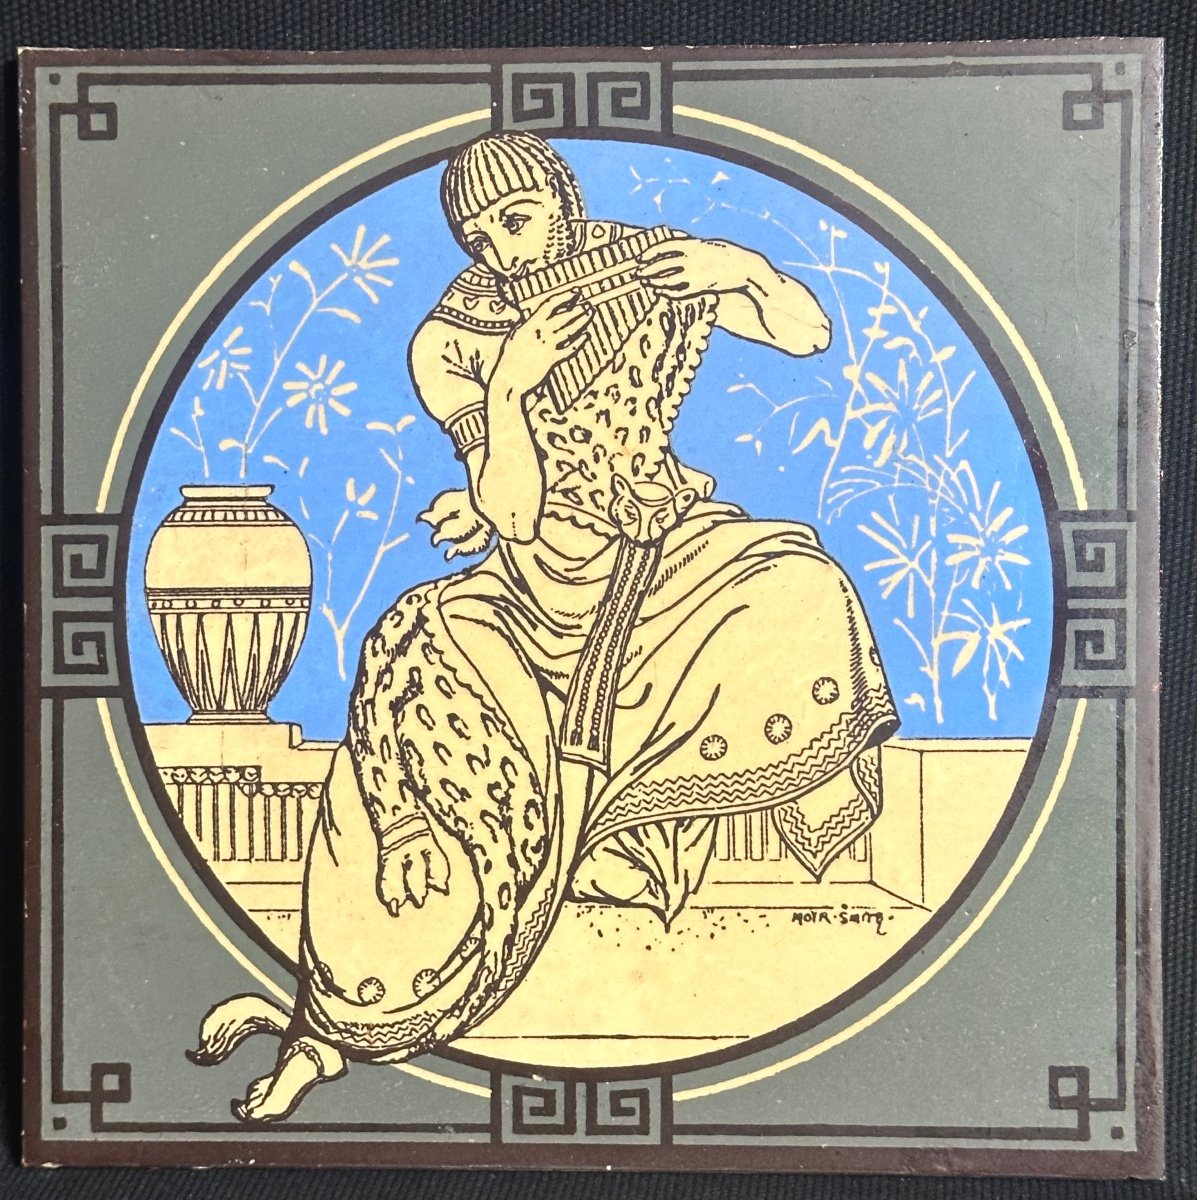 Minton Pair Of Earthenware Tiles Signed Moyr Smith 1839-1912 Mintons Stroke Upon Trent Music-photo-2